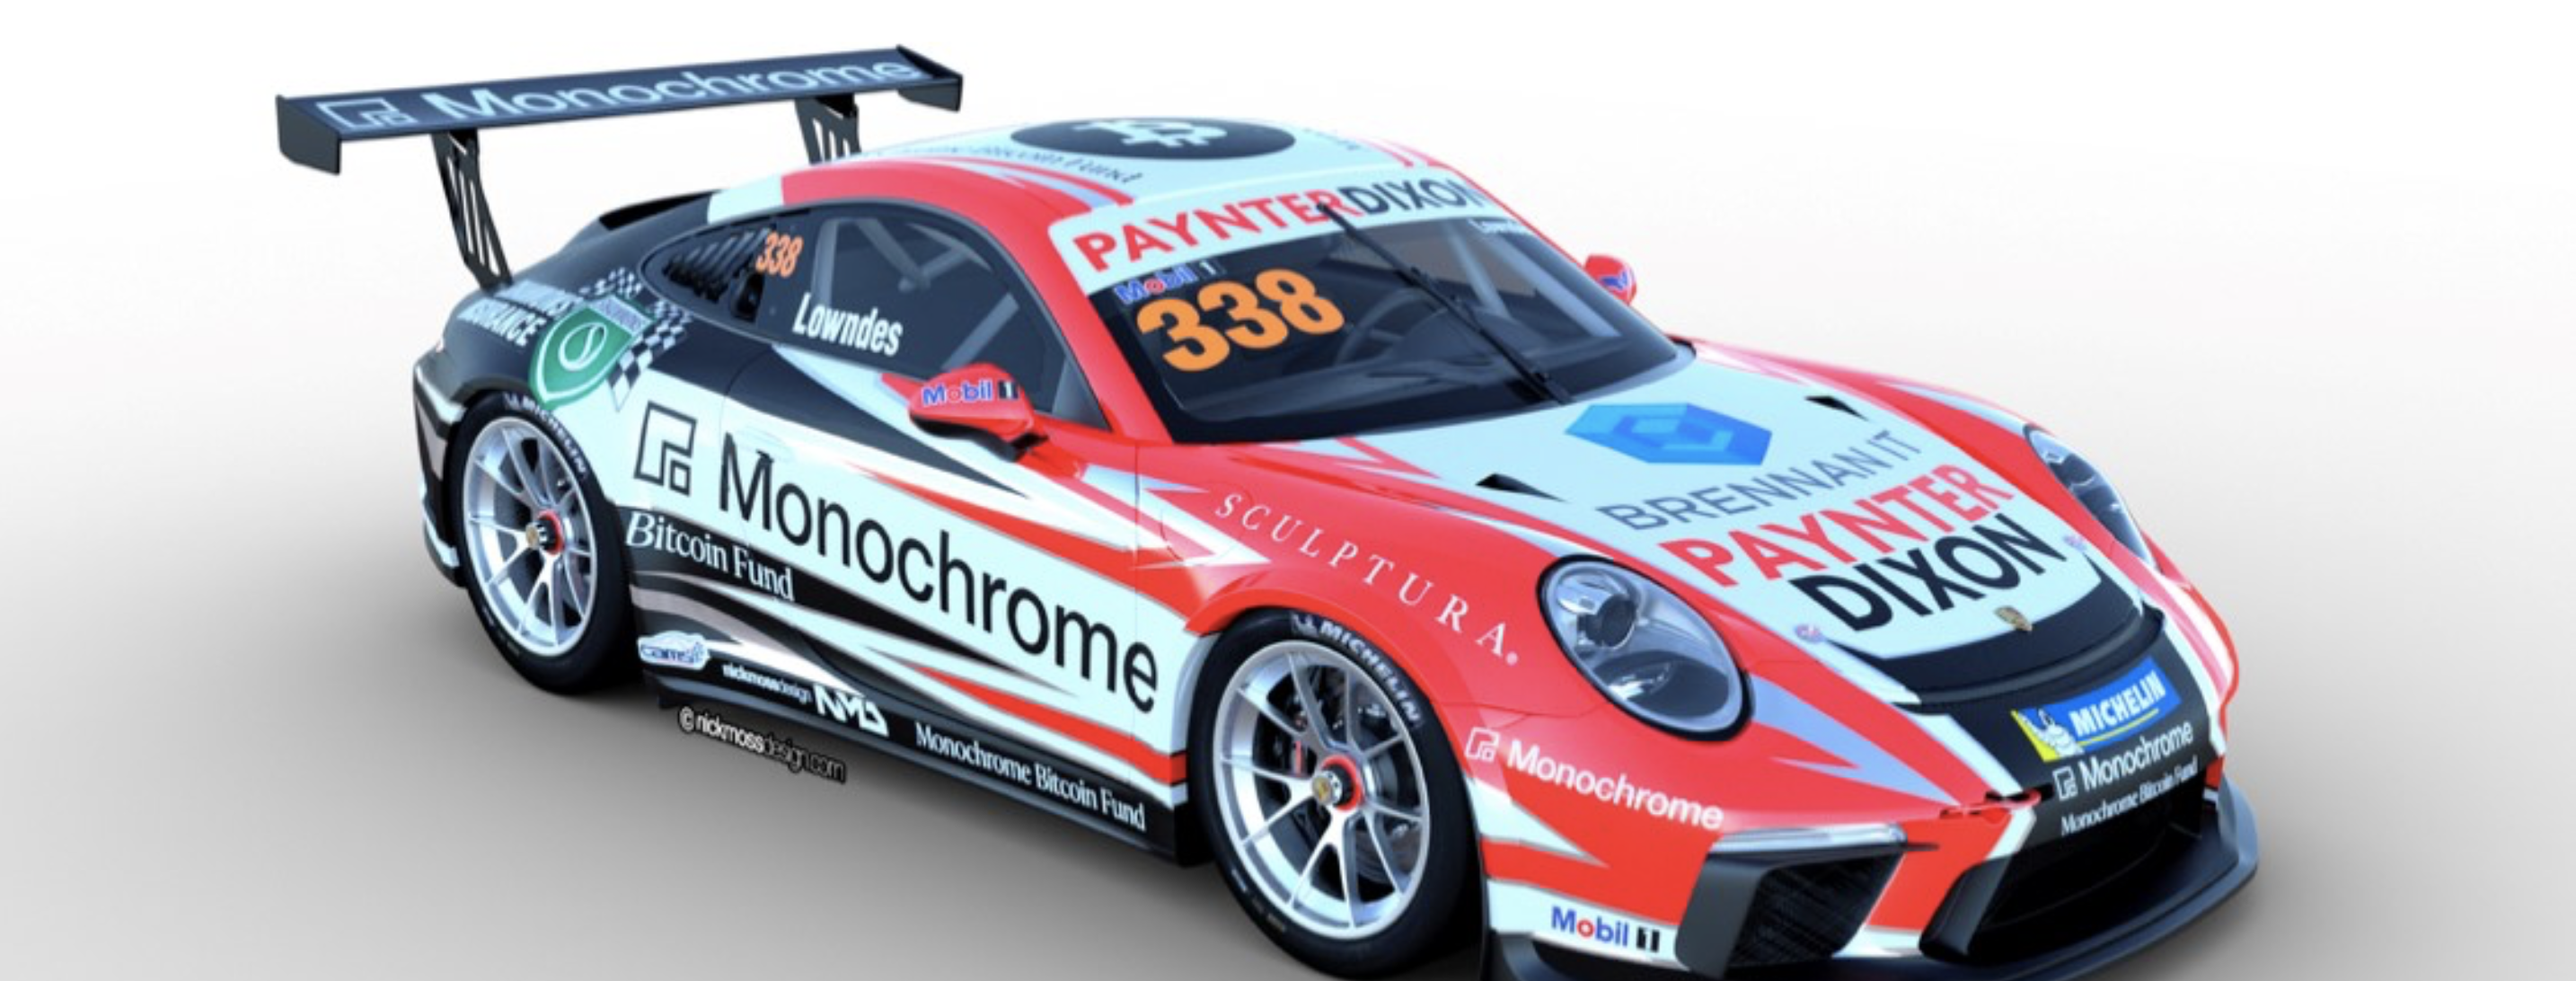 Lowndes and Wall Racing announce partnership with Monochrome Asset Management